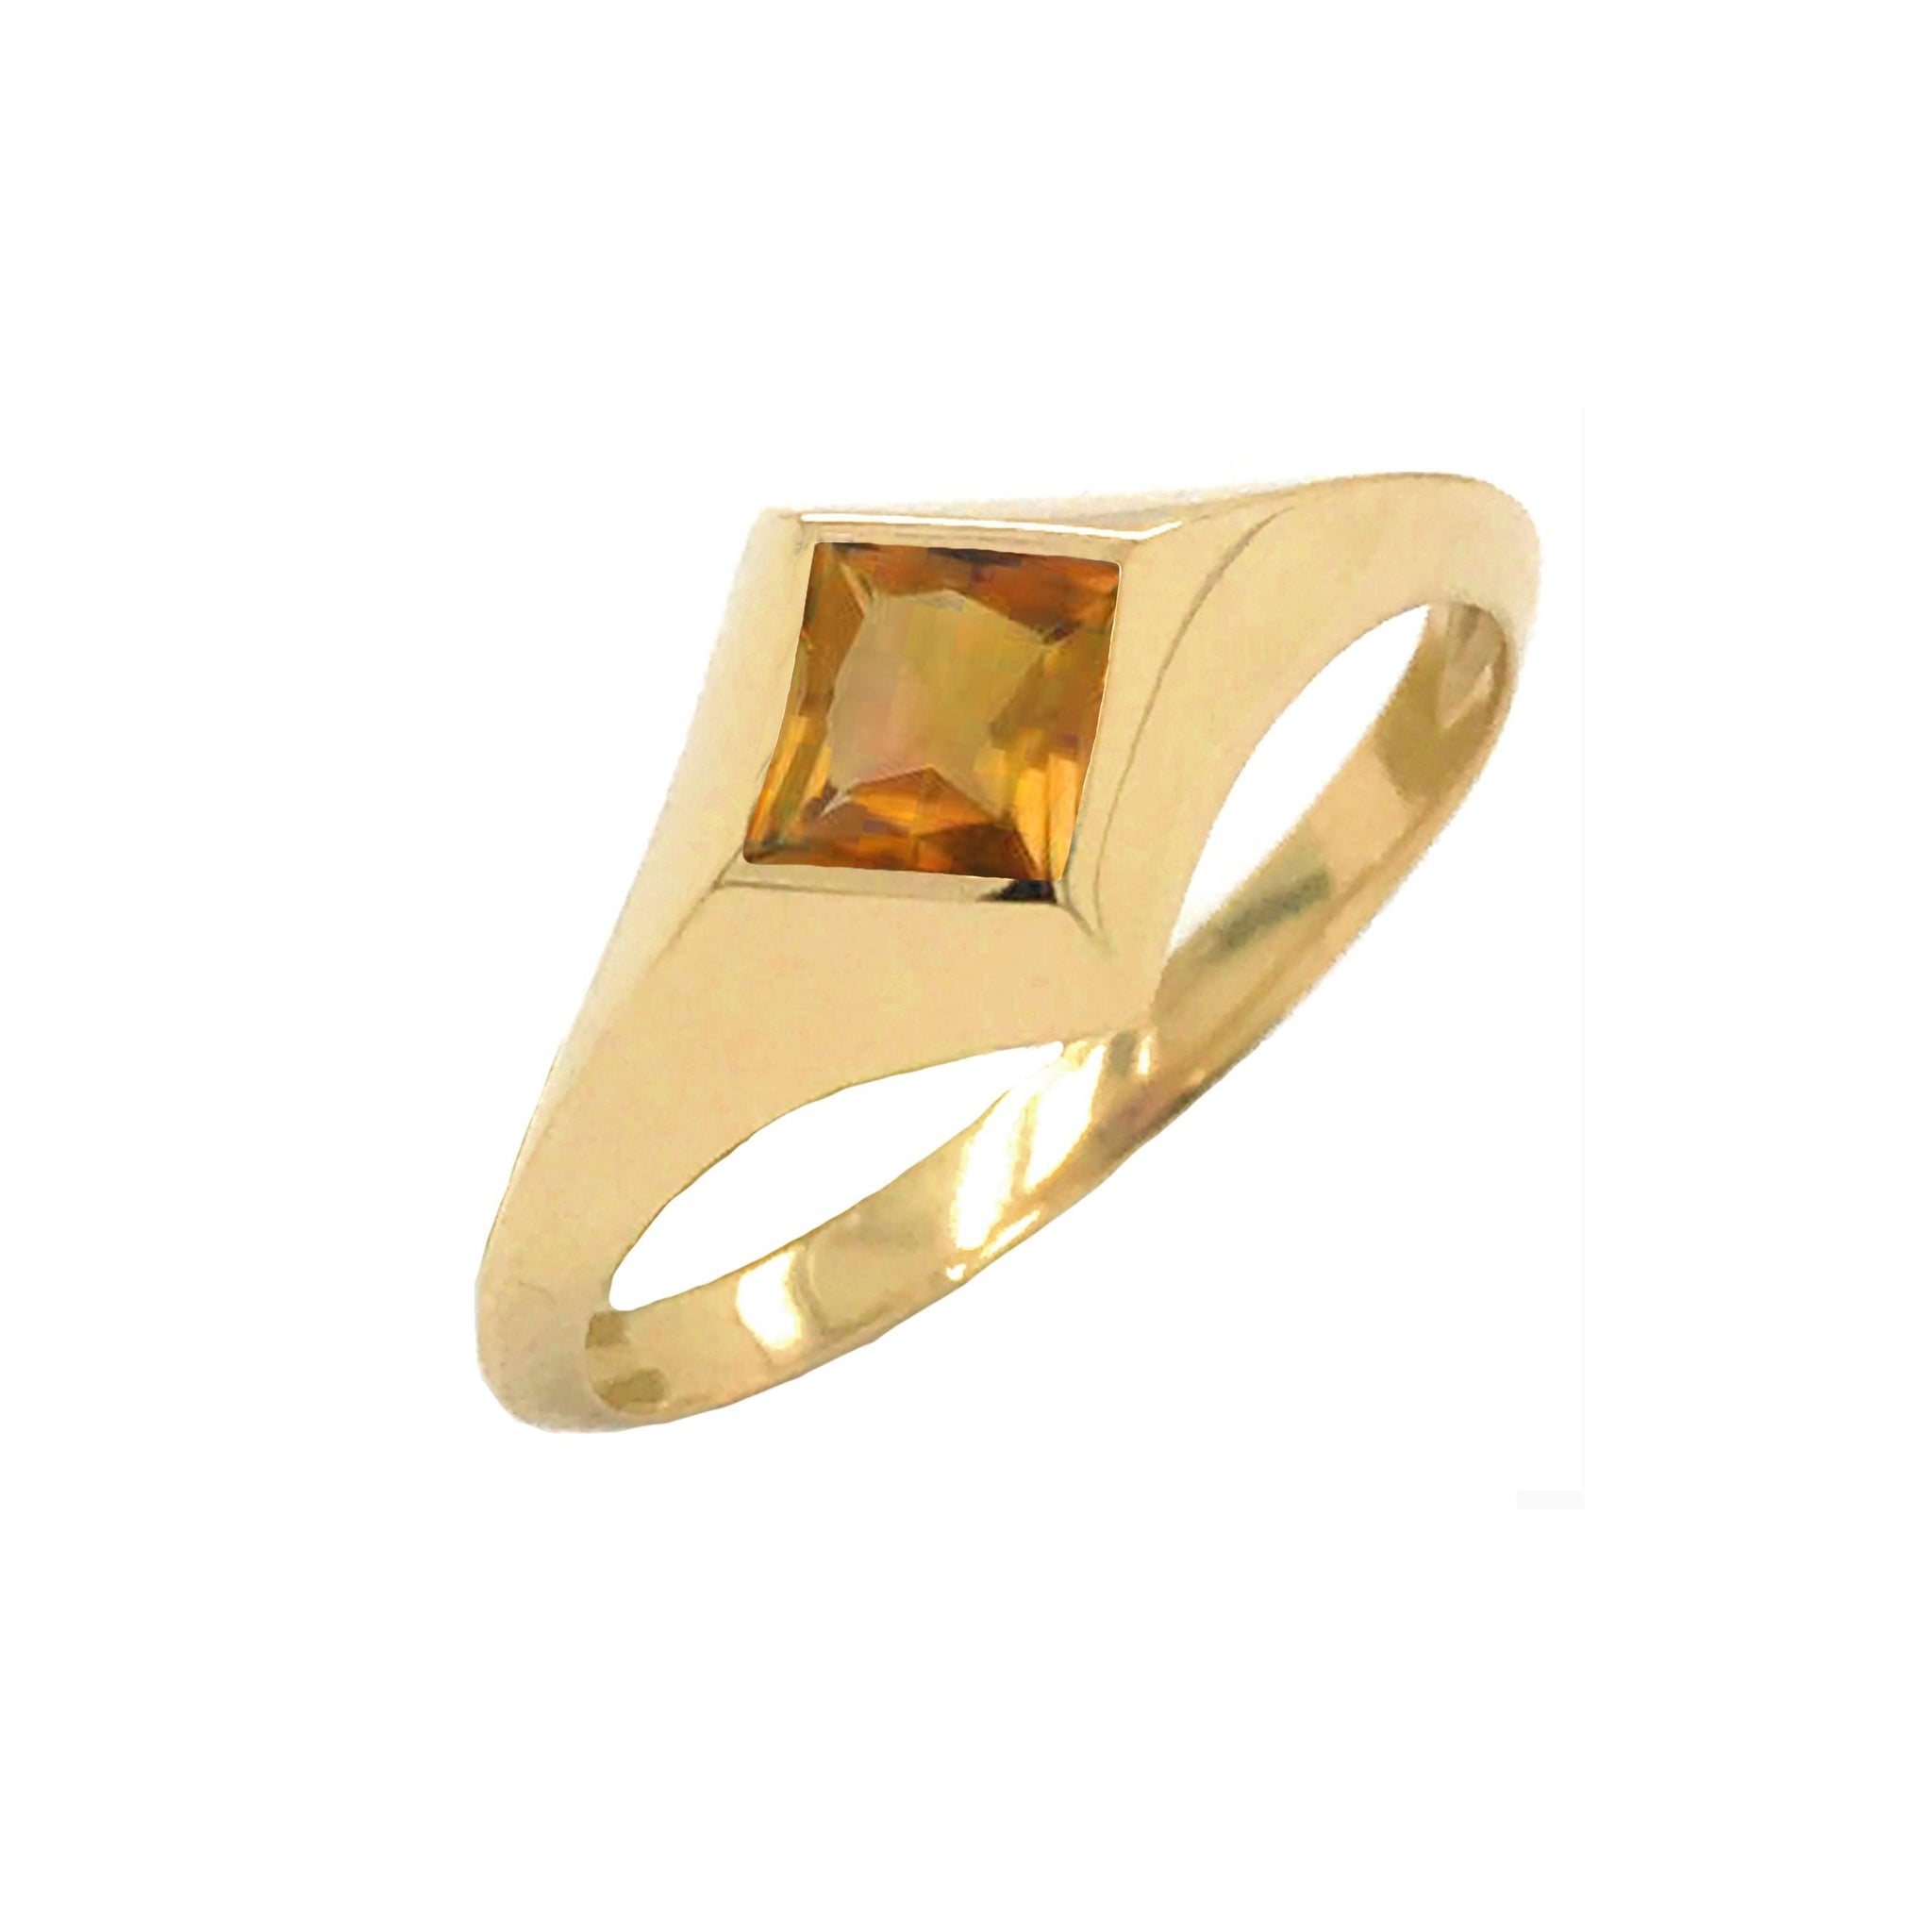 Elegant Solitaire Citrine Ring in Yellow Gold from Rafi's Jewelry